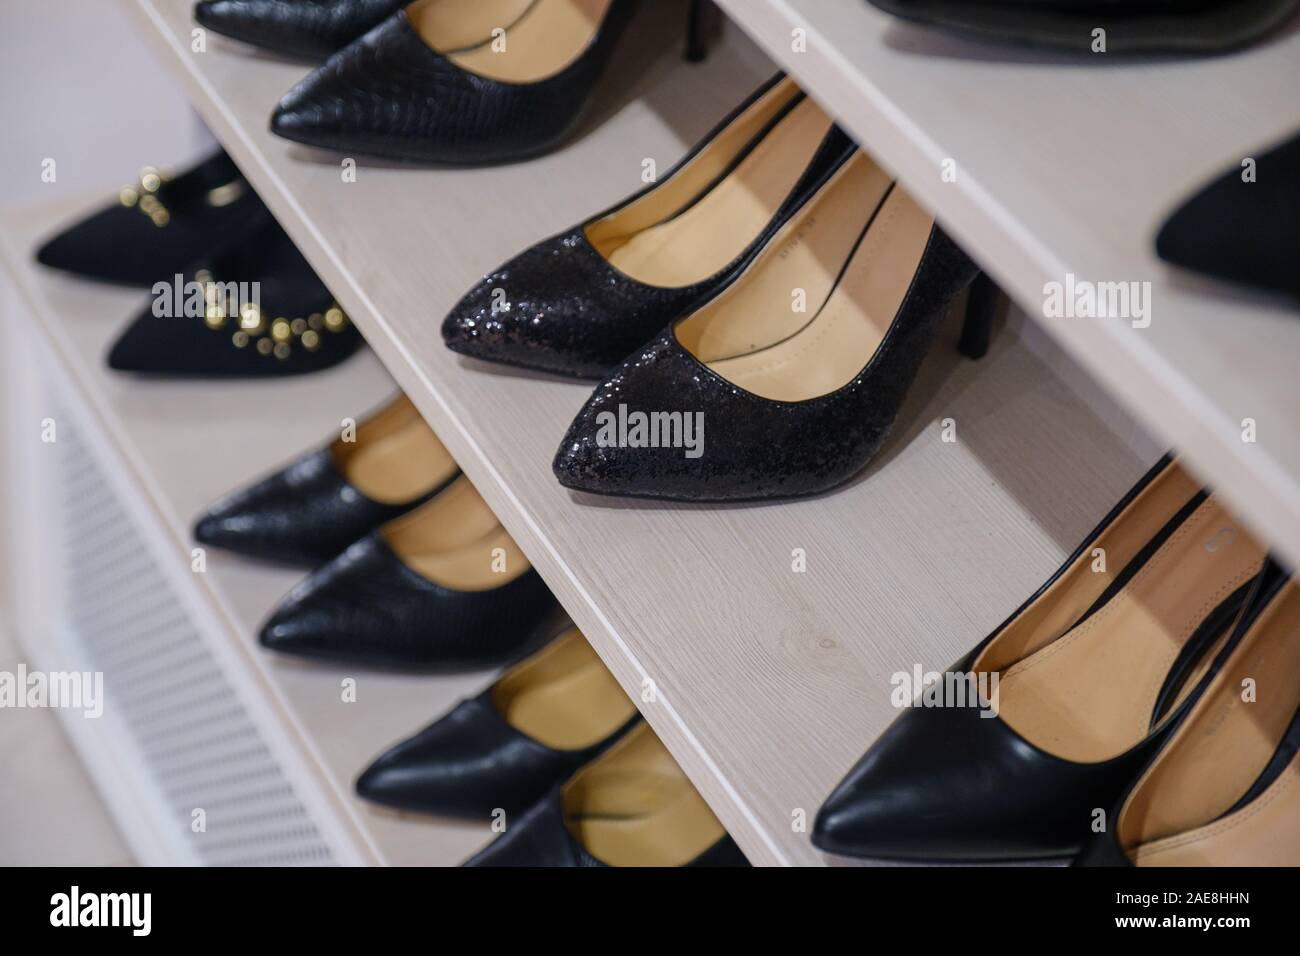 Side view of shelves of a shoe store with women's shoes on sale. Rows of new shoes in a store. Stock Photo